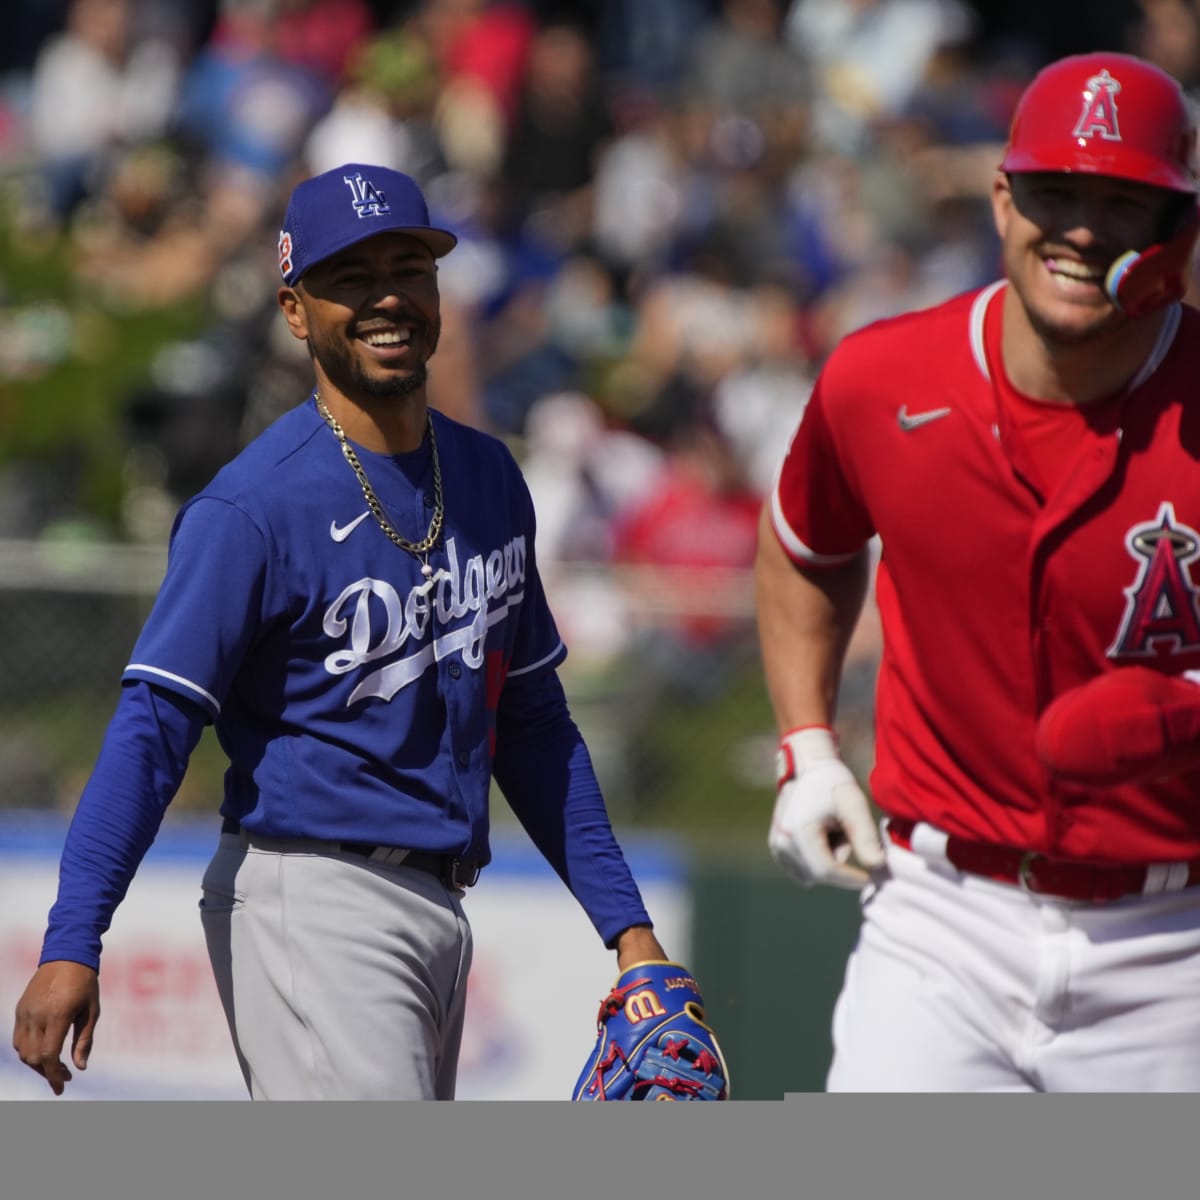 USA World Baseball Classic roster: Mike Trout, Mookie Betts